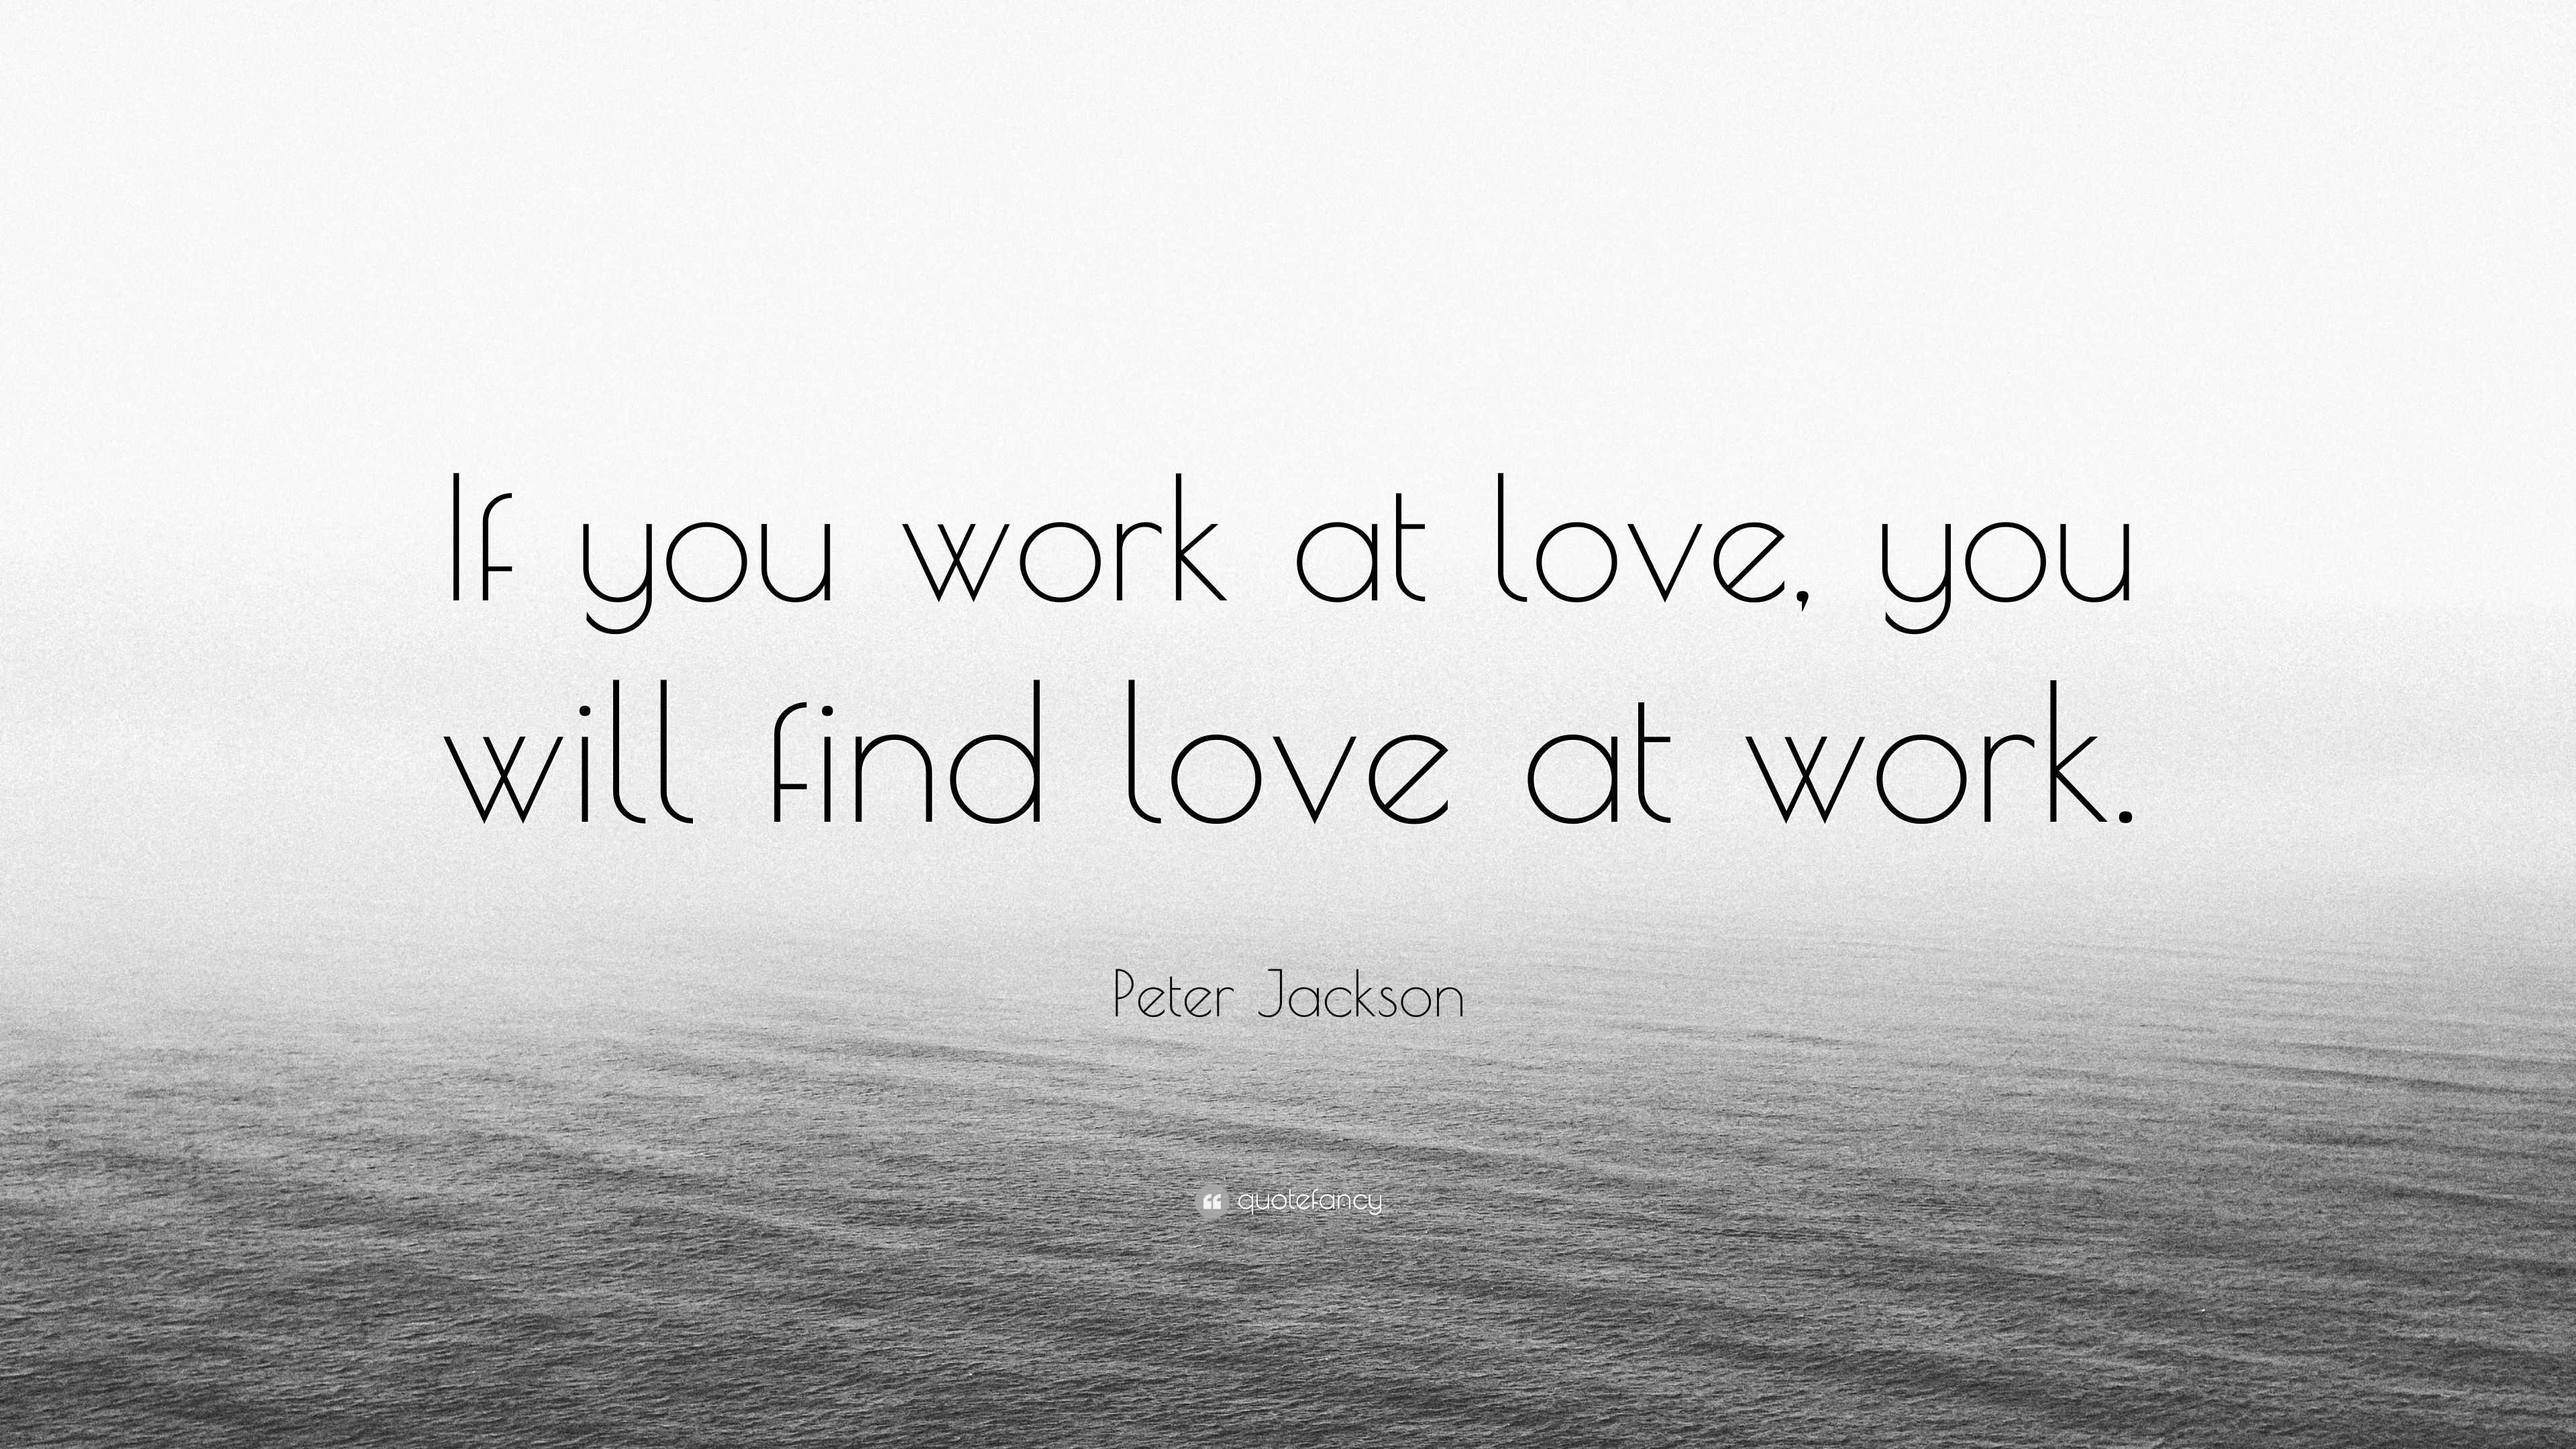 Peter Jackson Quote “If you work at love you will find love at